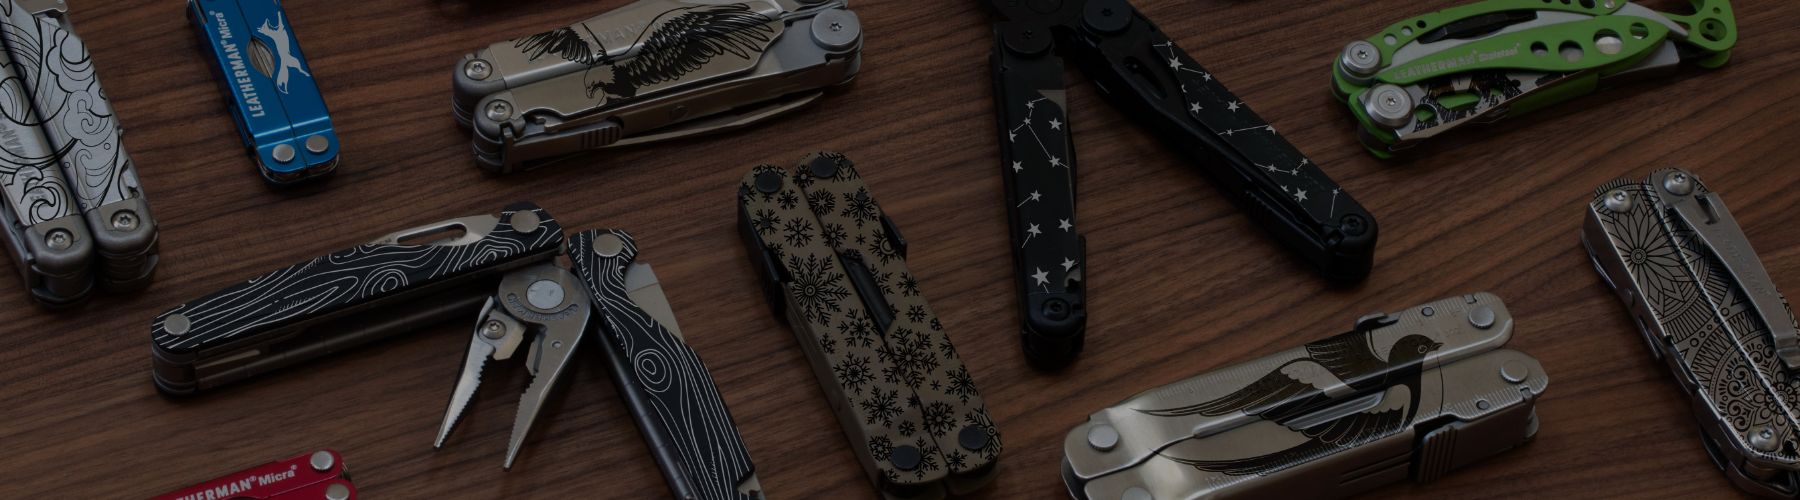 Leatherman multi-tools customized with laser etched patterns, pictures, and messages.